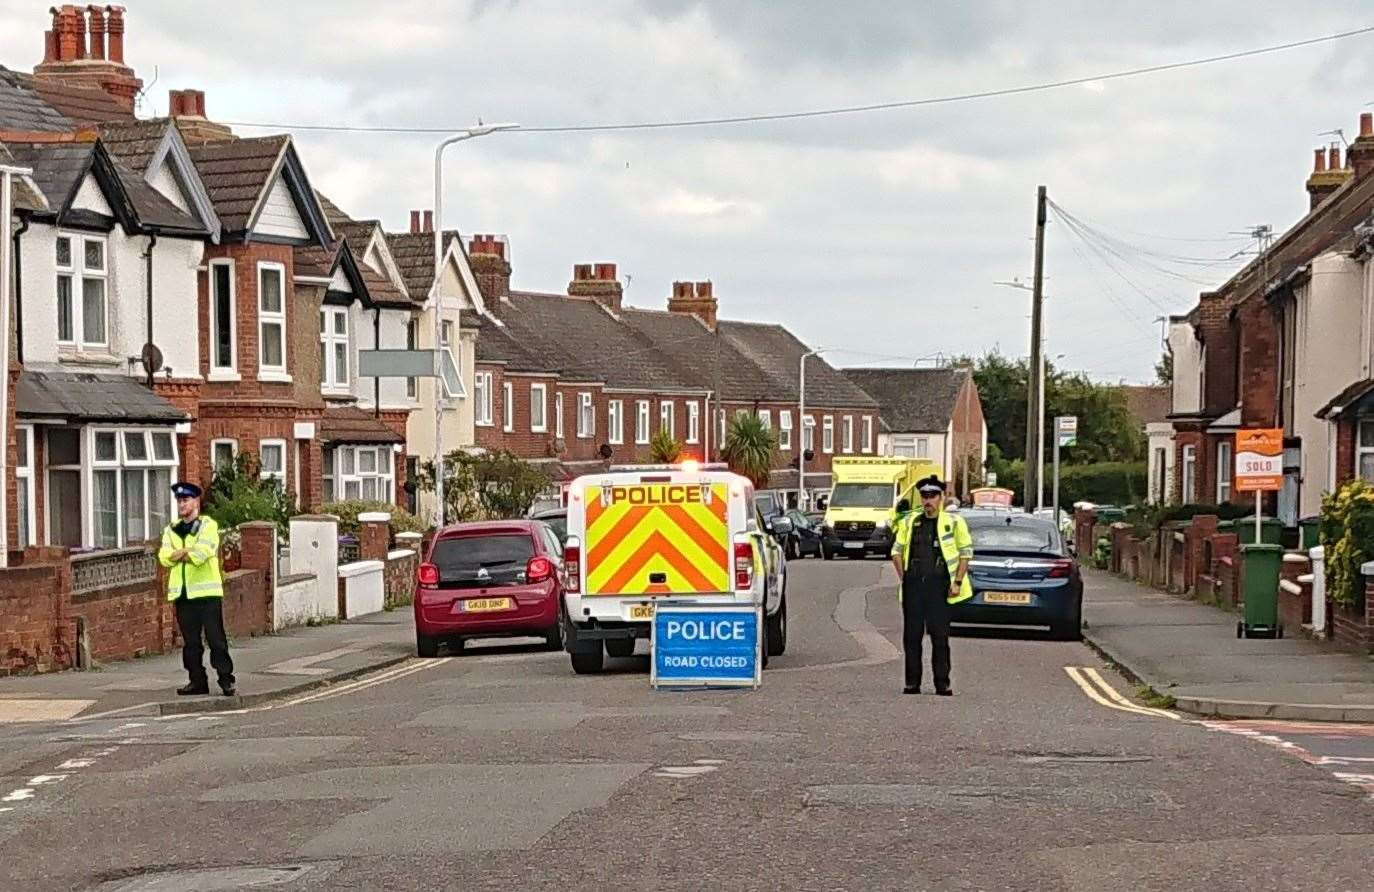 Church Road was closed following the collision